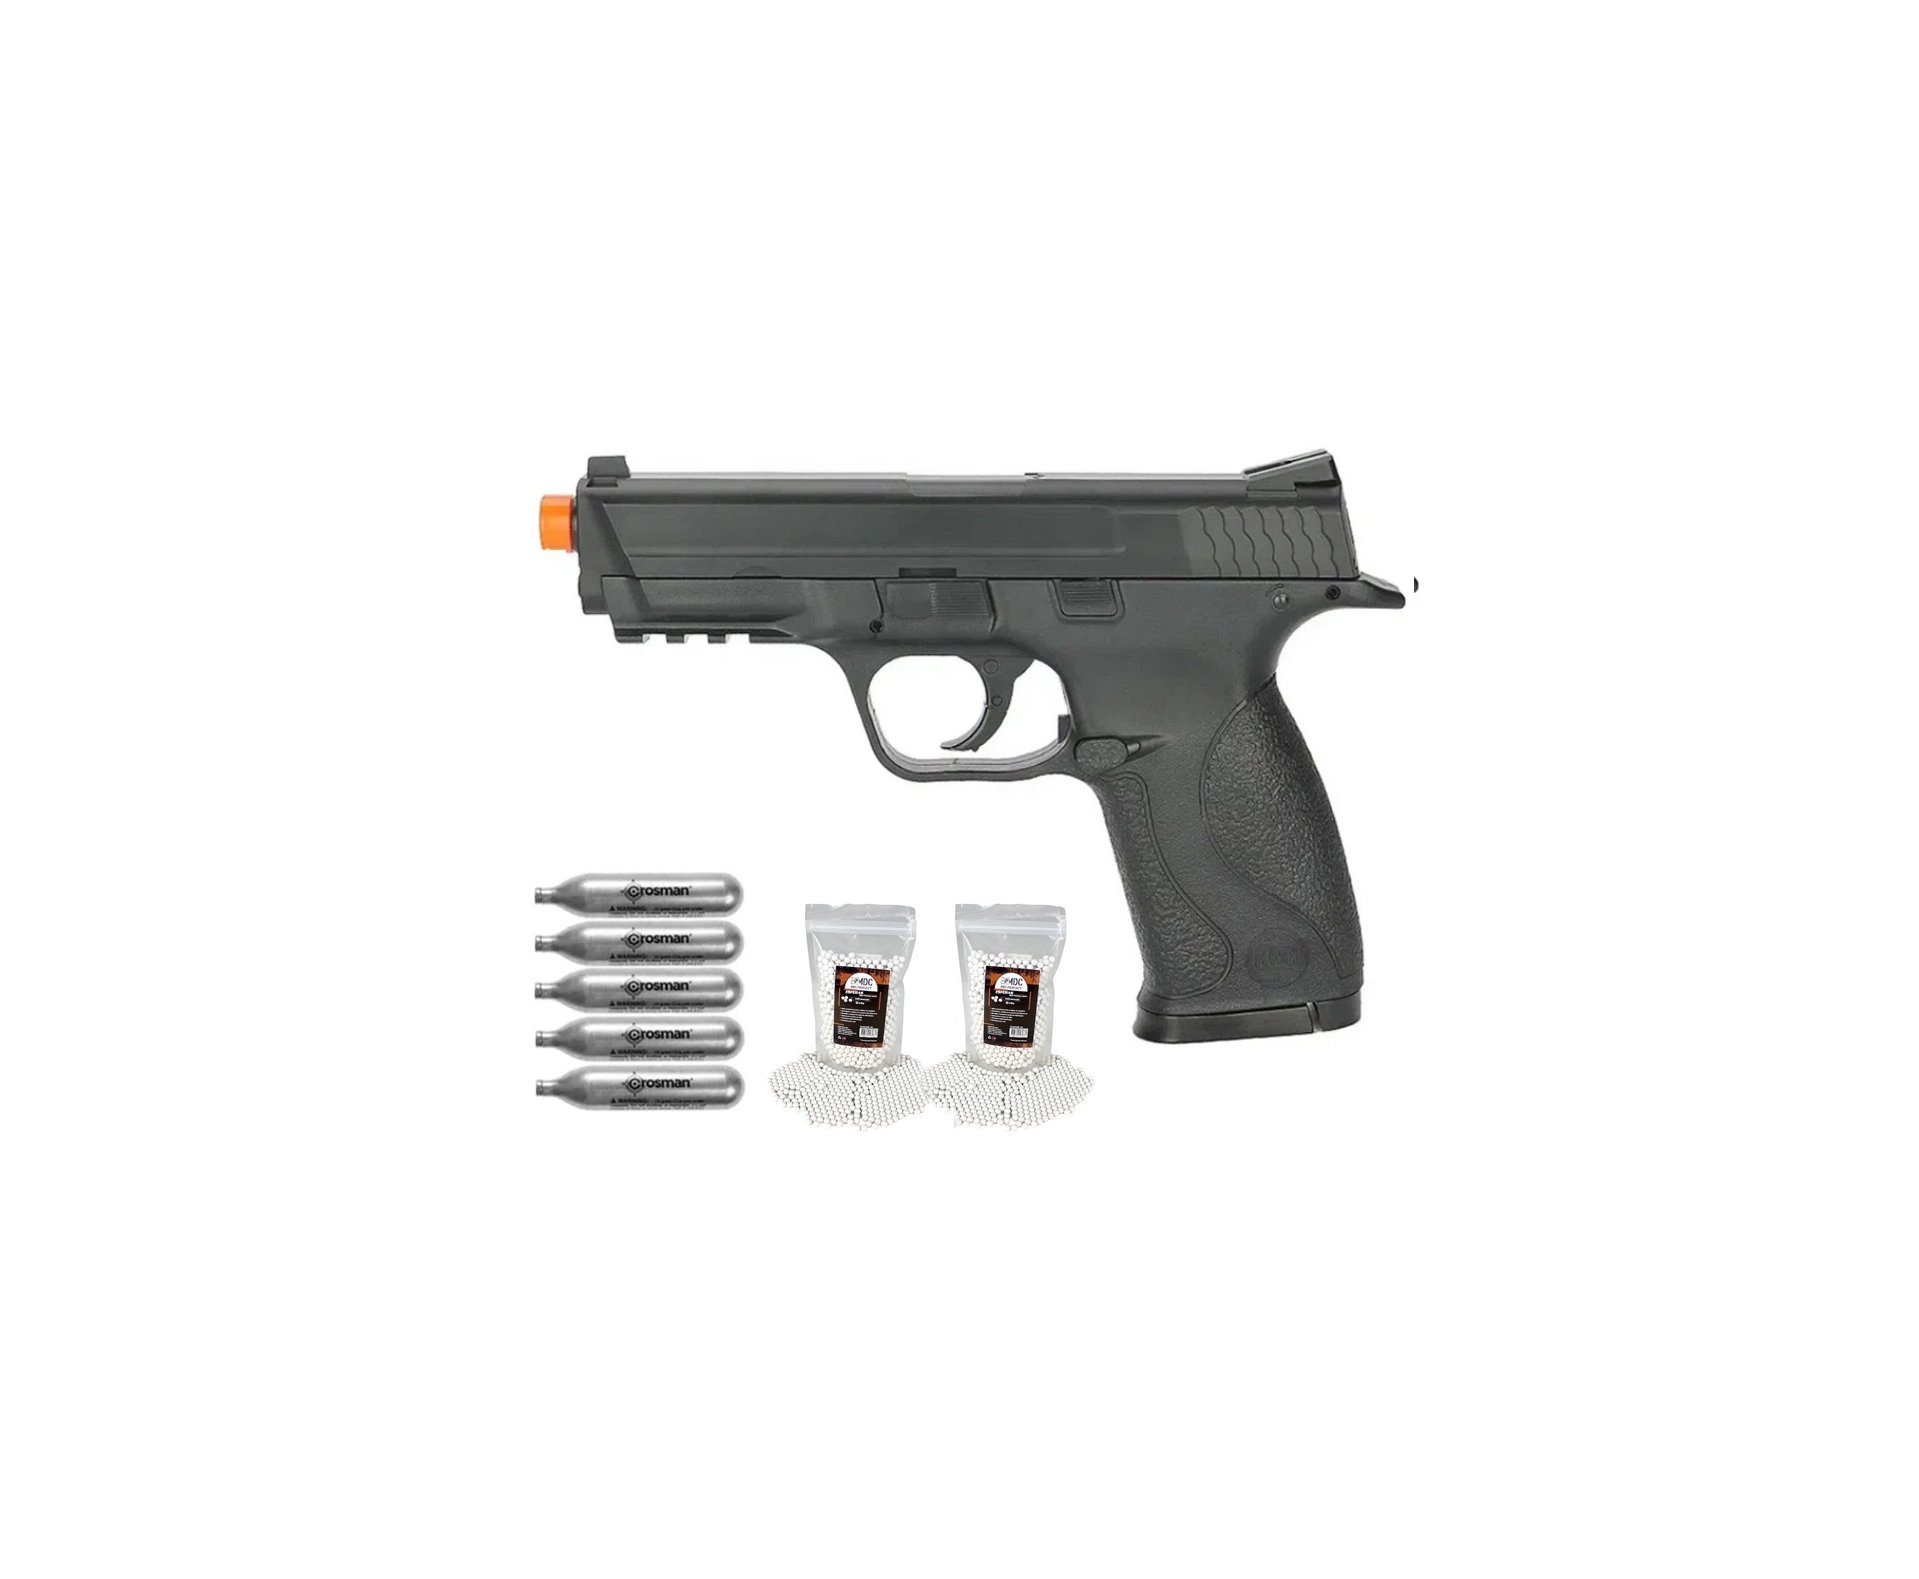 Pistola de Airsoft CO2 S&W MP40 Cal 6mm KWC Rossi + CO2 + Bbs 0,25g